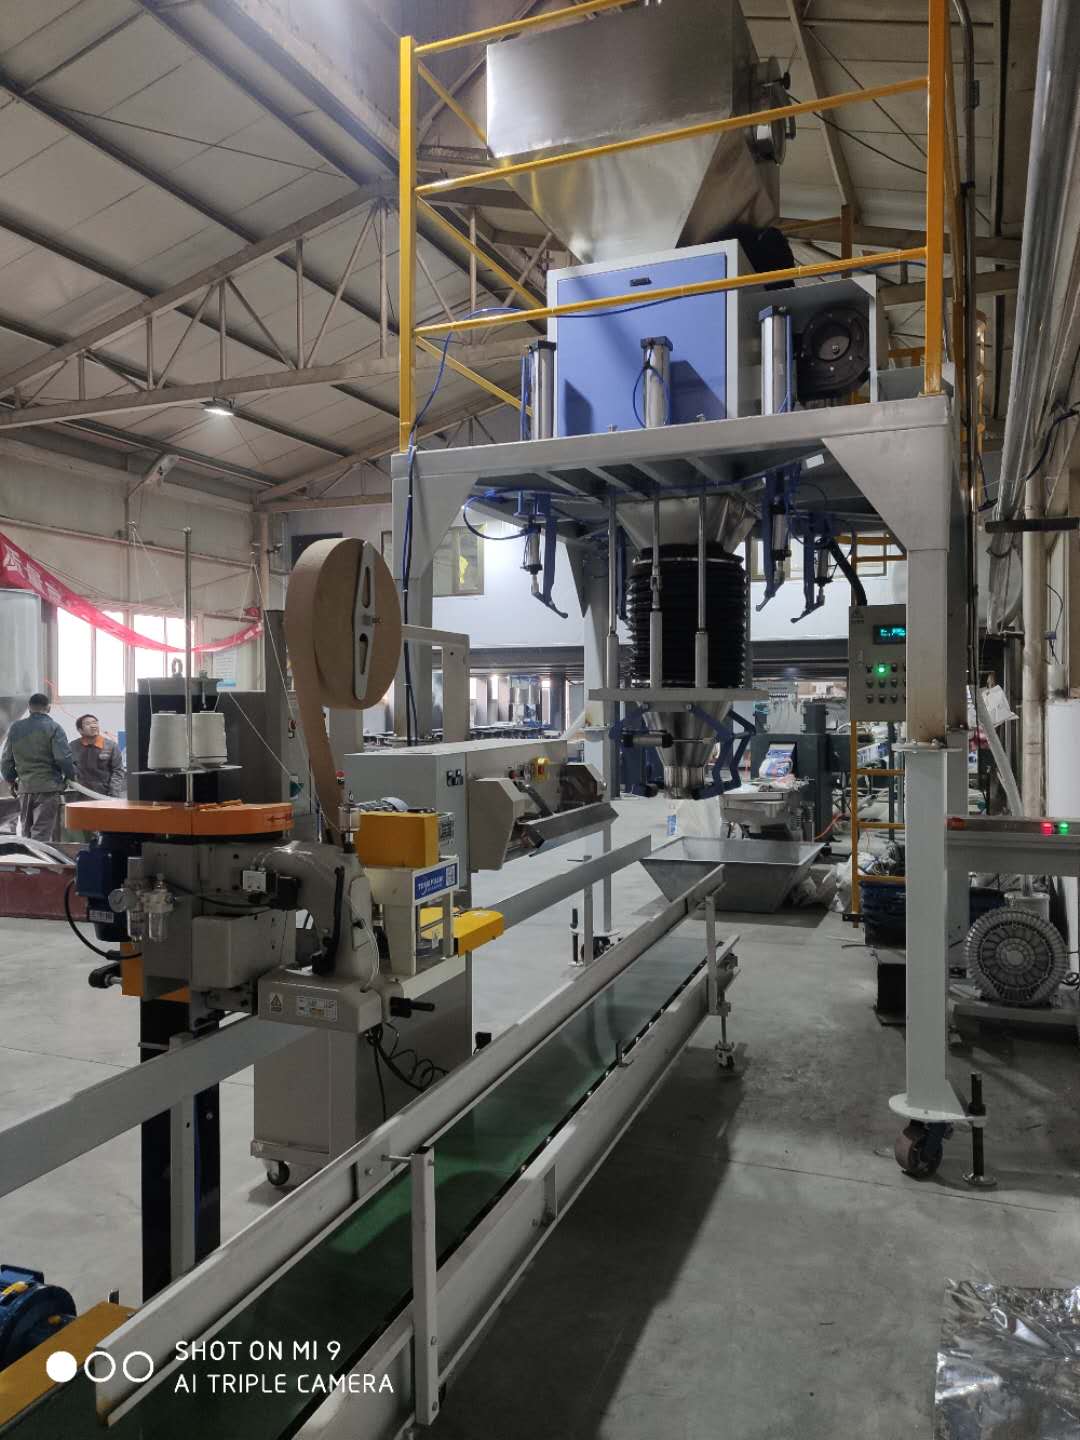 Single Super Phosphate bagging machine Automated Bagging Line Fully Automatic Packing Palletizing Line, Fully Automatic Packing Line, Fully Automatic Bagging Line, Fully Automatic filling and packagin